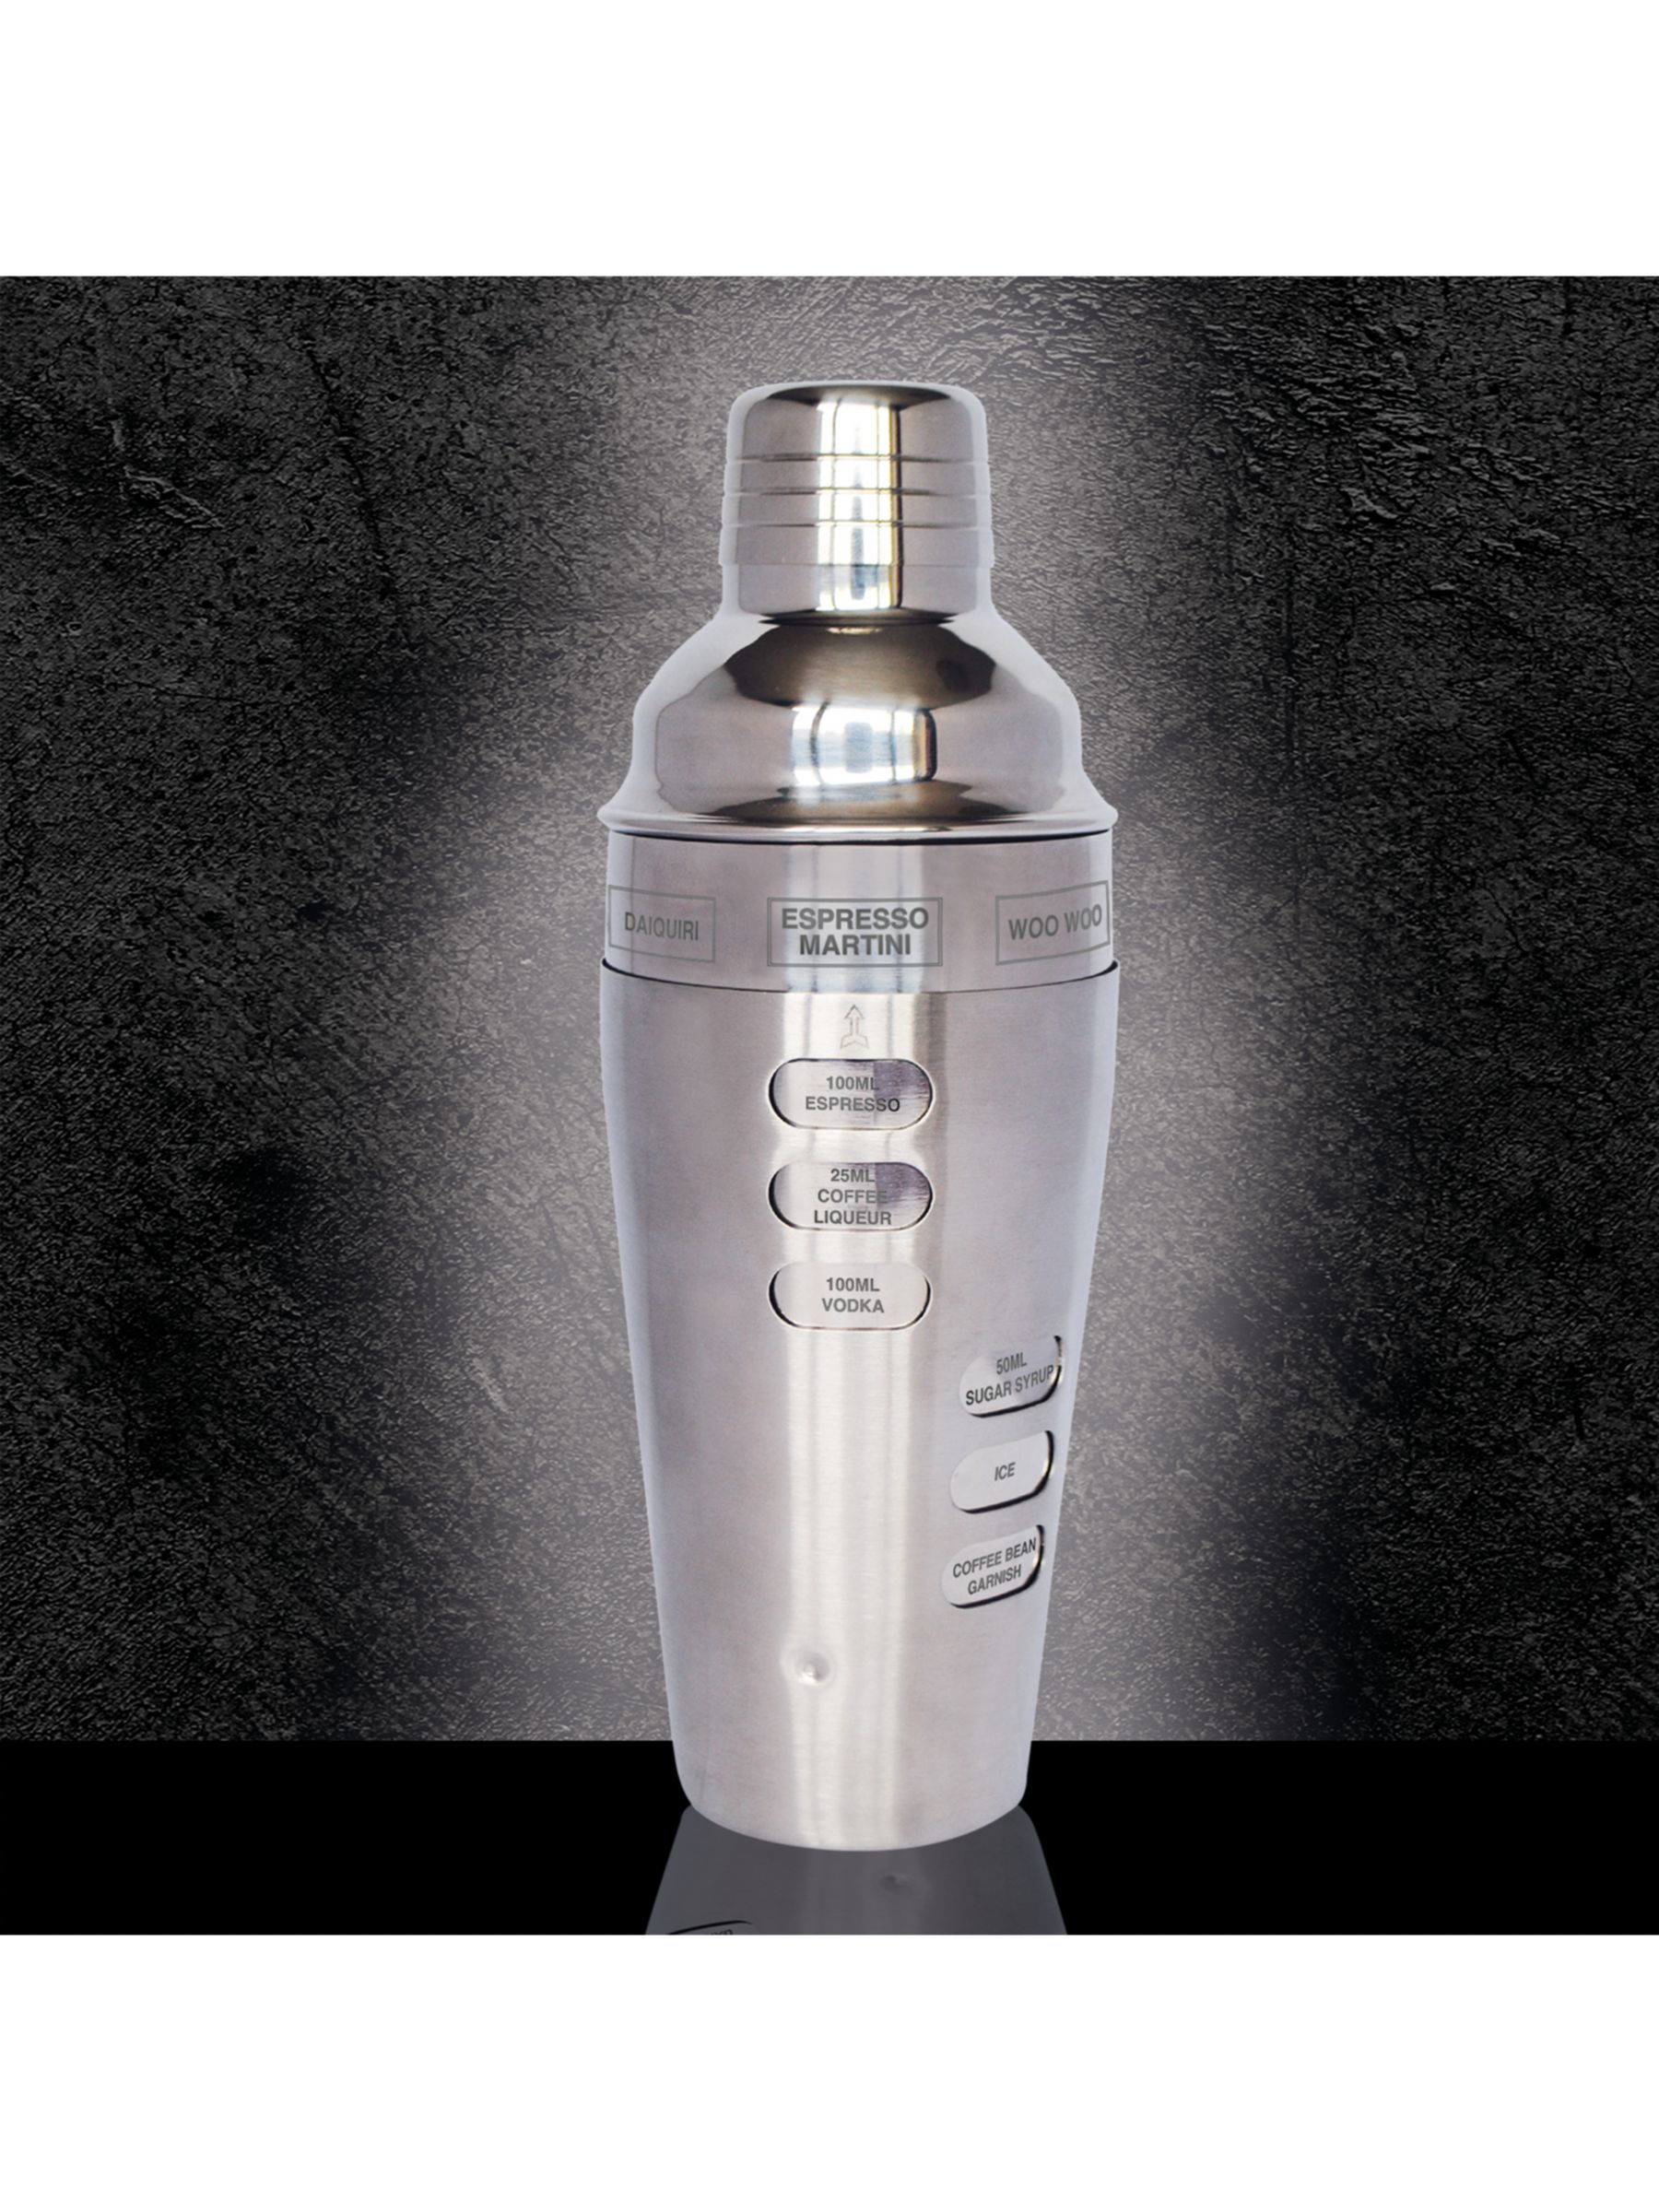 Stock Harbor 30 oz Insulated Cocktail Shaker Cup and Shaker Top - With